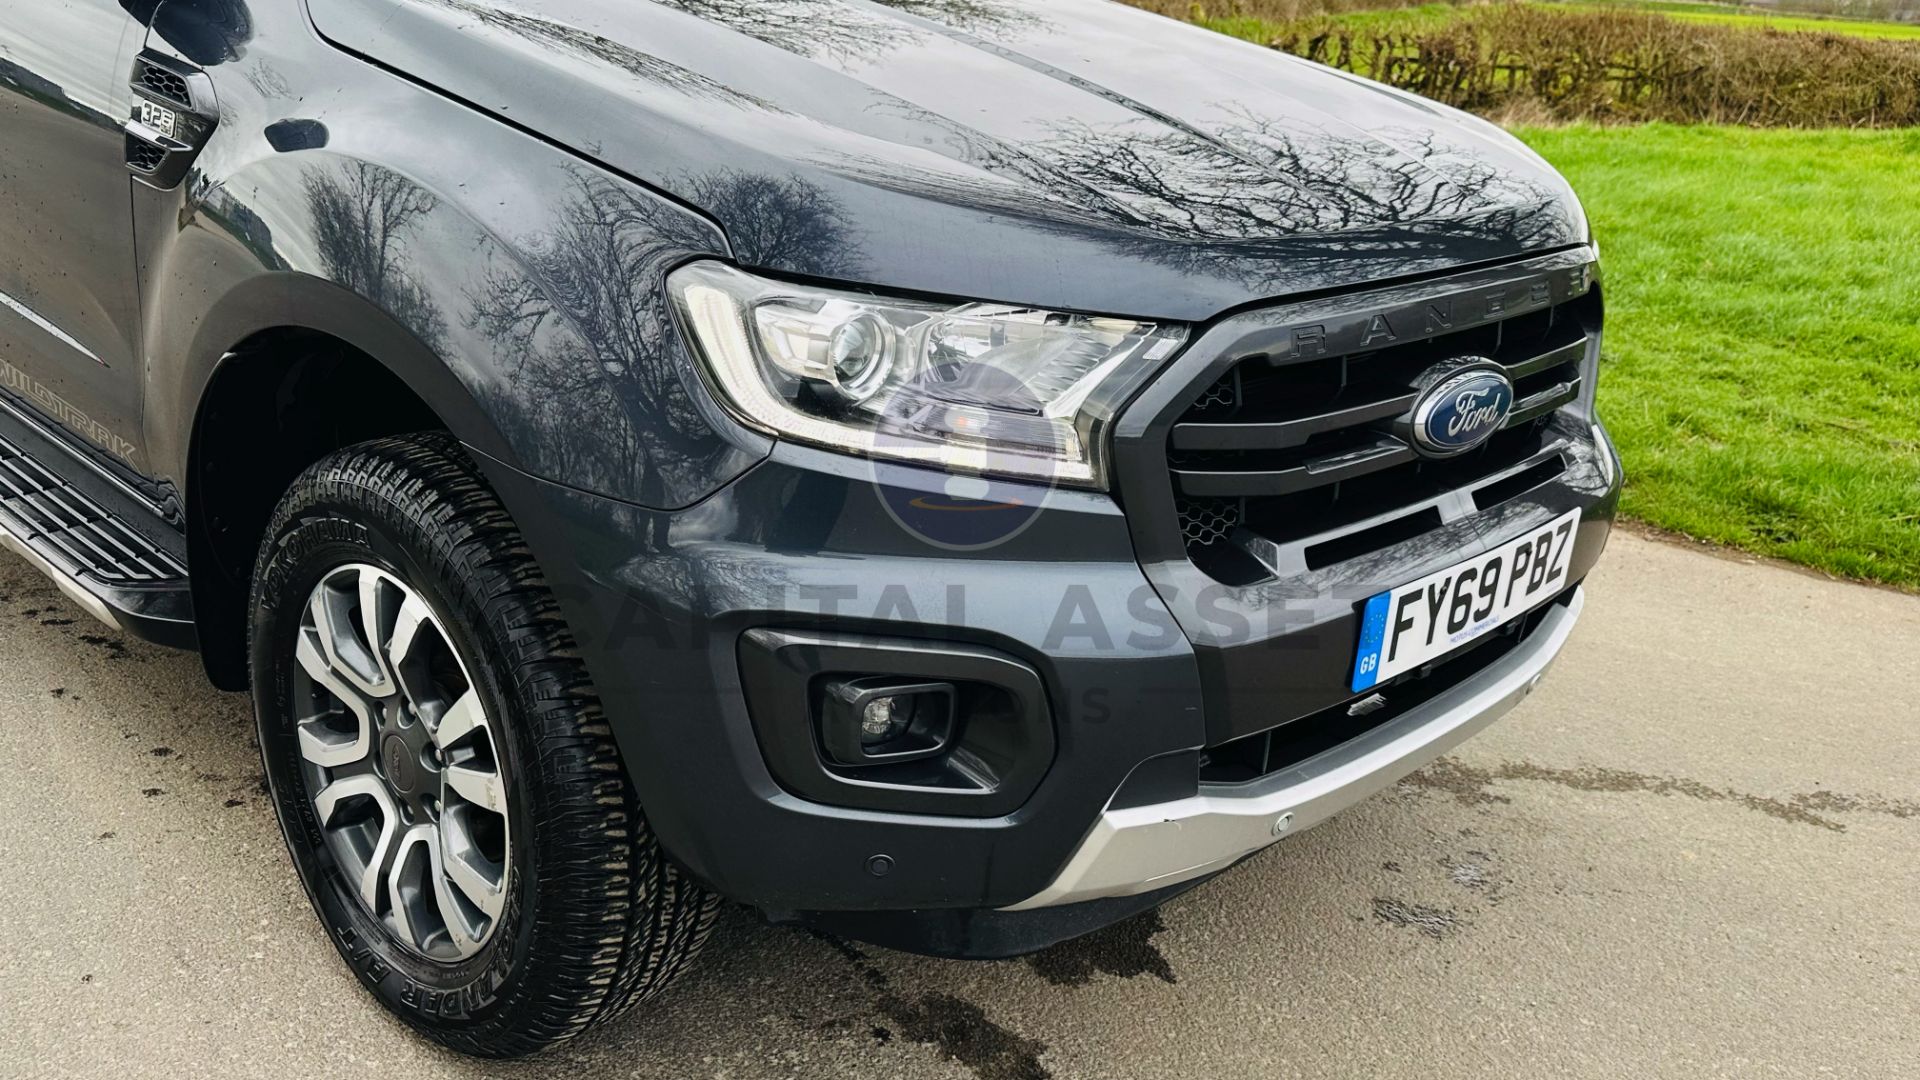 FORD RANGER *WILDTRAK EDITION* DOUBLE CAB PICK-UP (2020 - EURO 6) 3.2 TDCI - AUTOMATIC *HUGE SPEC* - Image 18 of 49